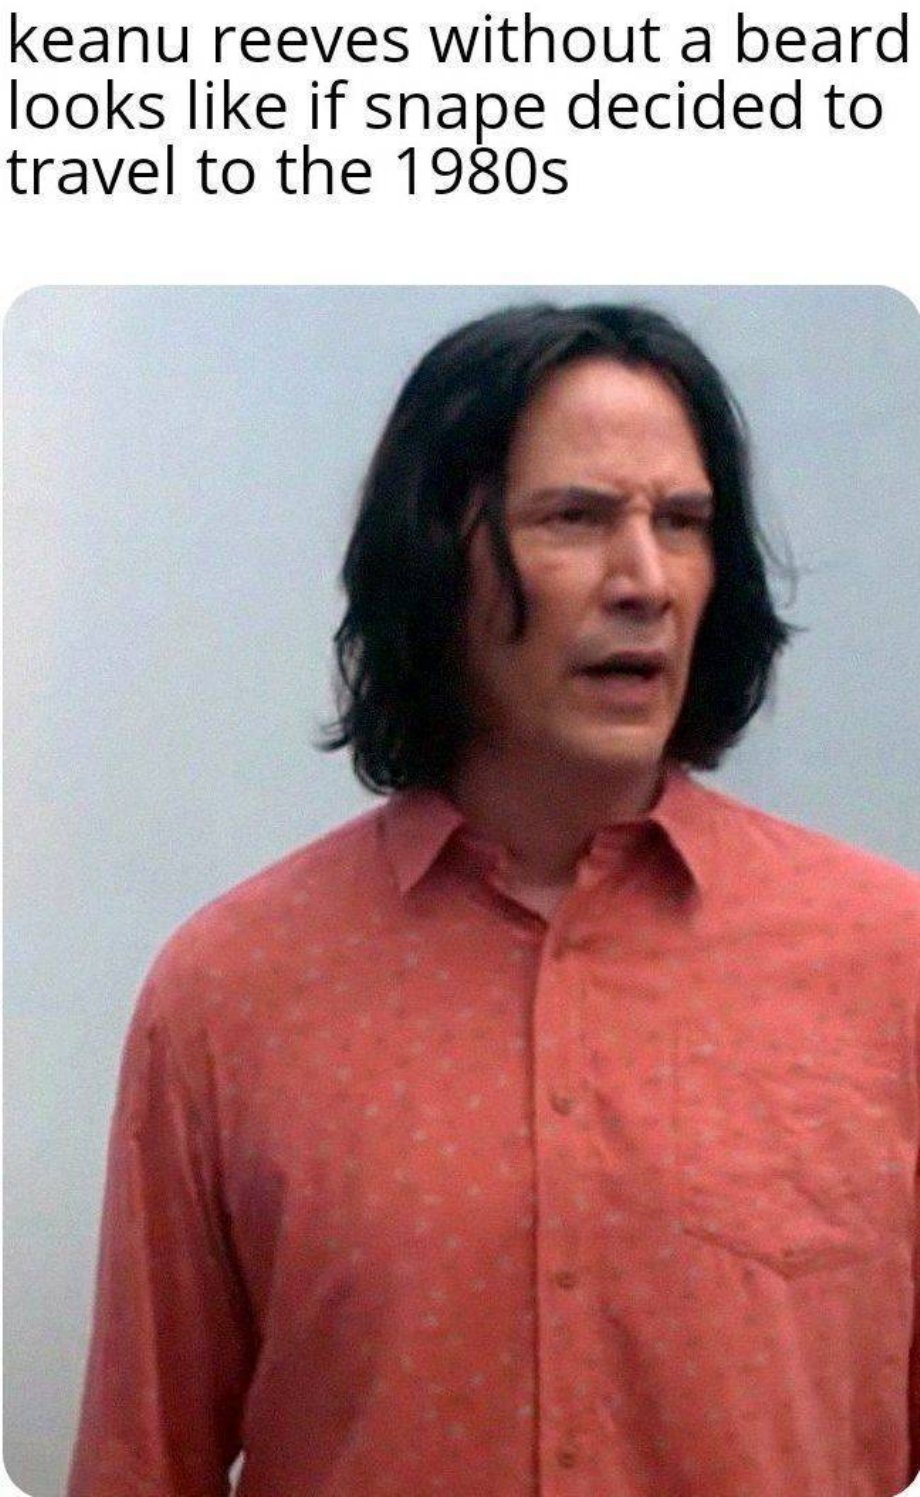 bill and ted face the music - keanu reeves without a beard looks if snape decided to travel to the 1980s